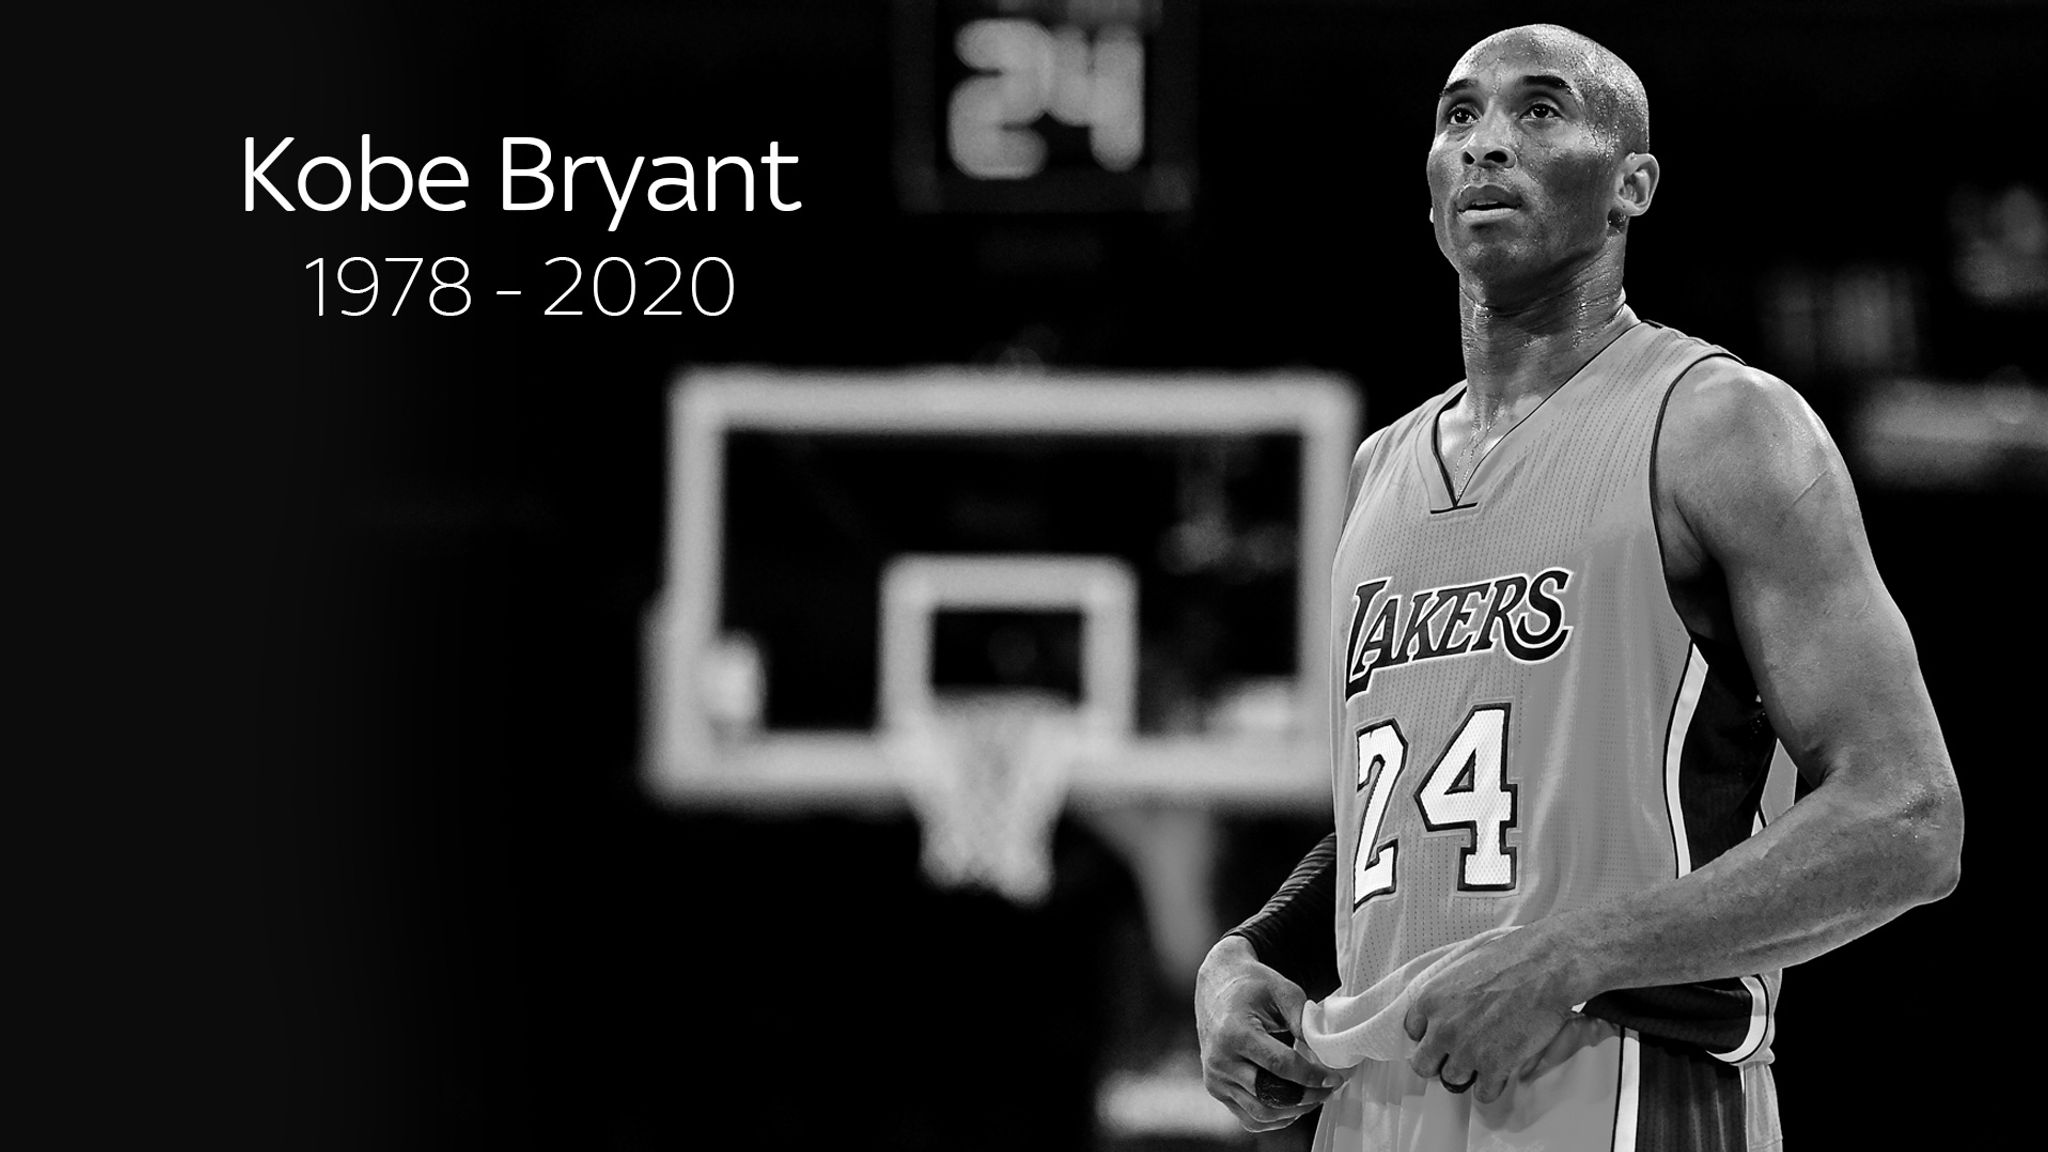 Kobe Bryant, Lakers legend and NBA great, dies at 41 in helicopter crash